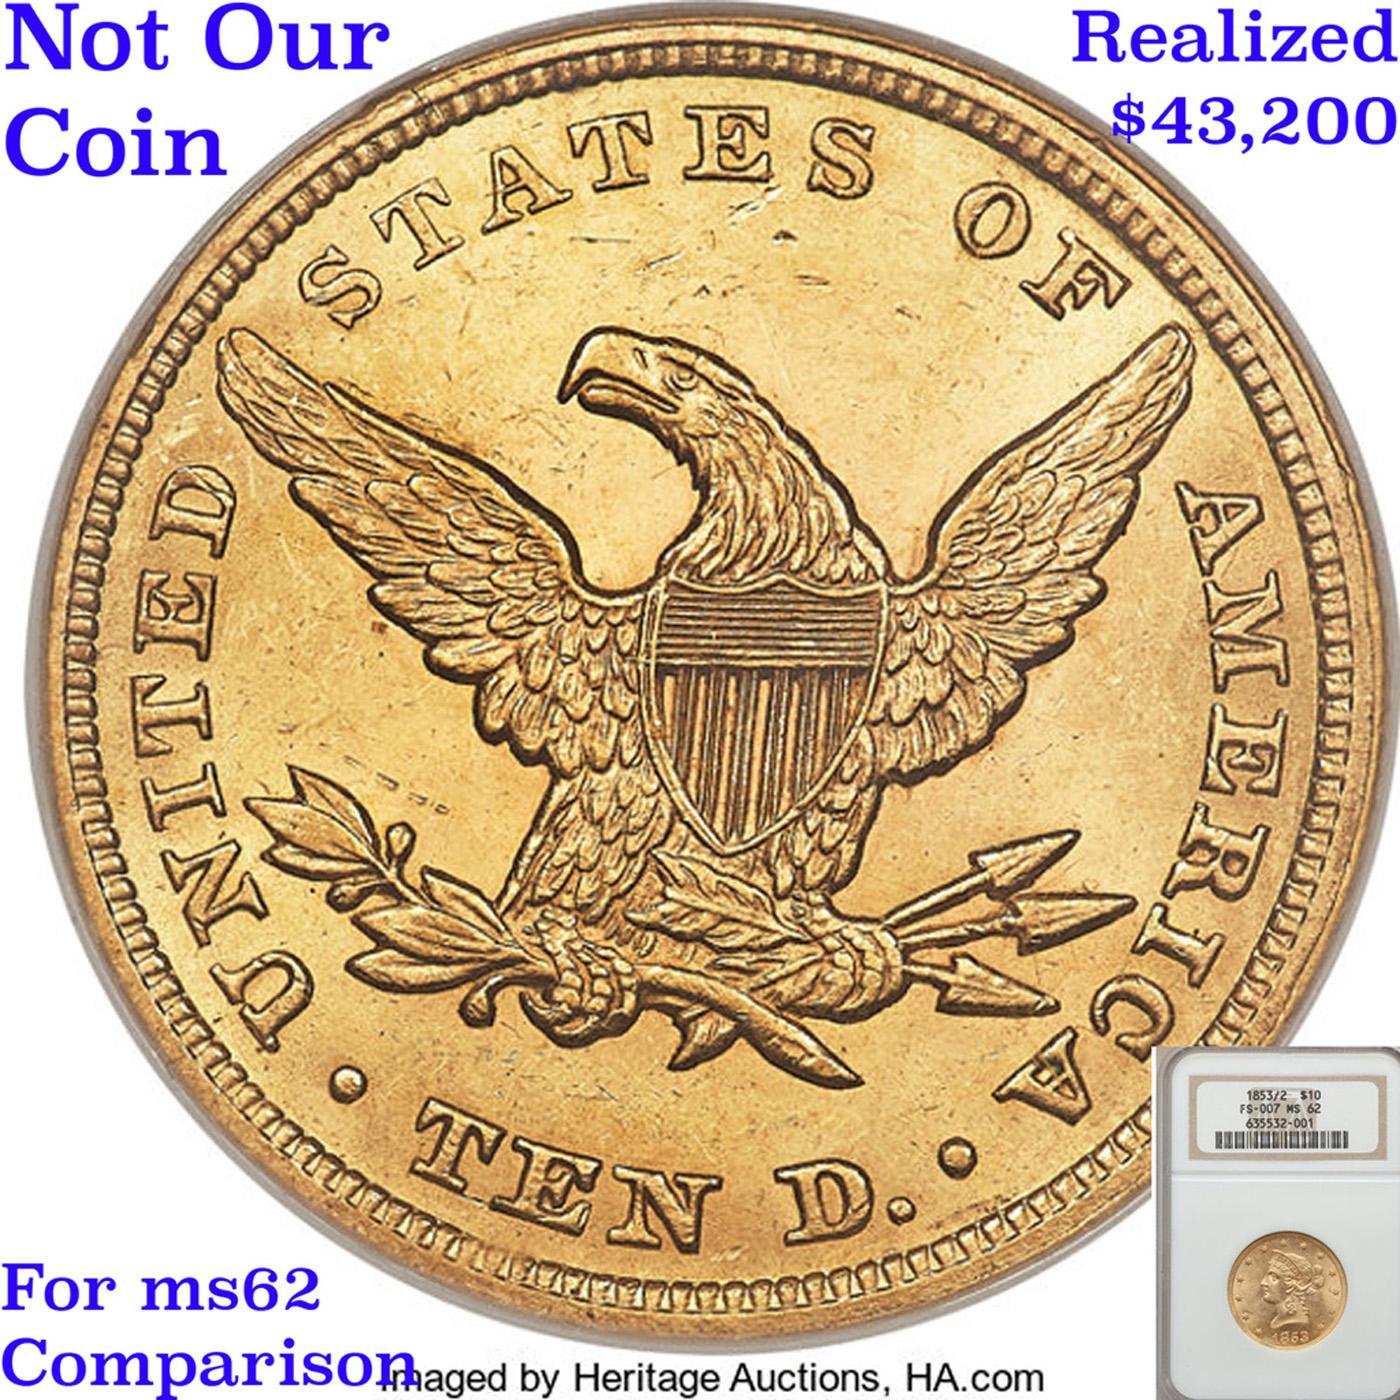 ***Auction Highlight*** 1853/2 TOP POP! Gold Liberty Eagle $10 Graded ms62 By SEGS (fc)